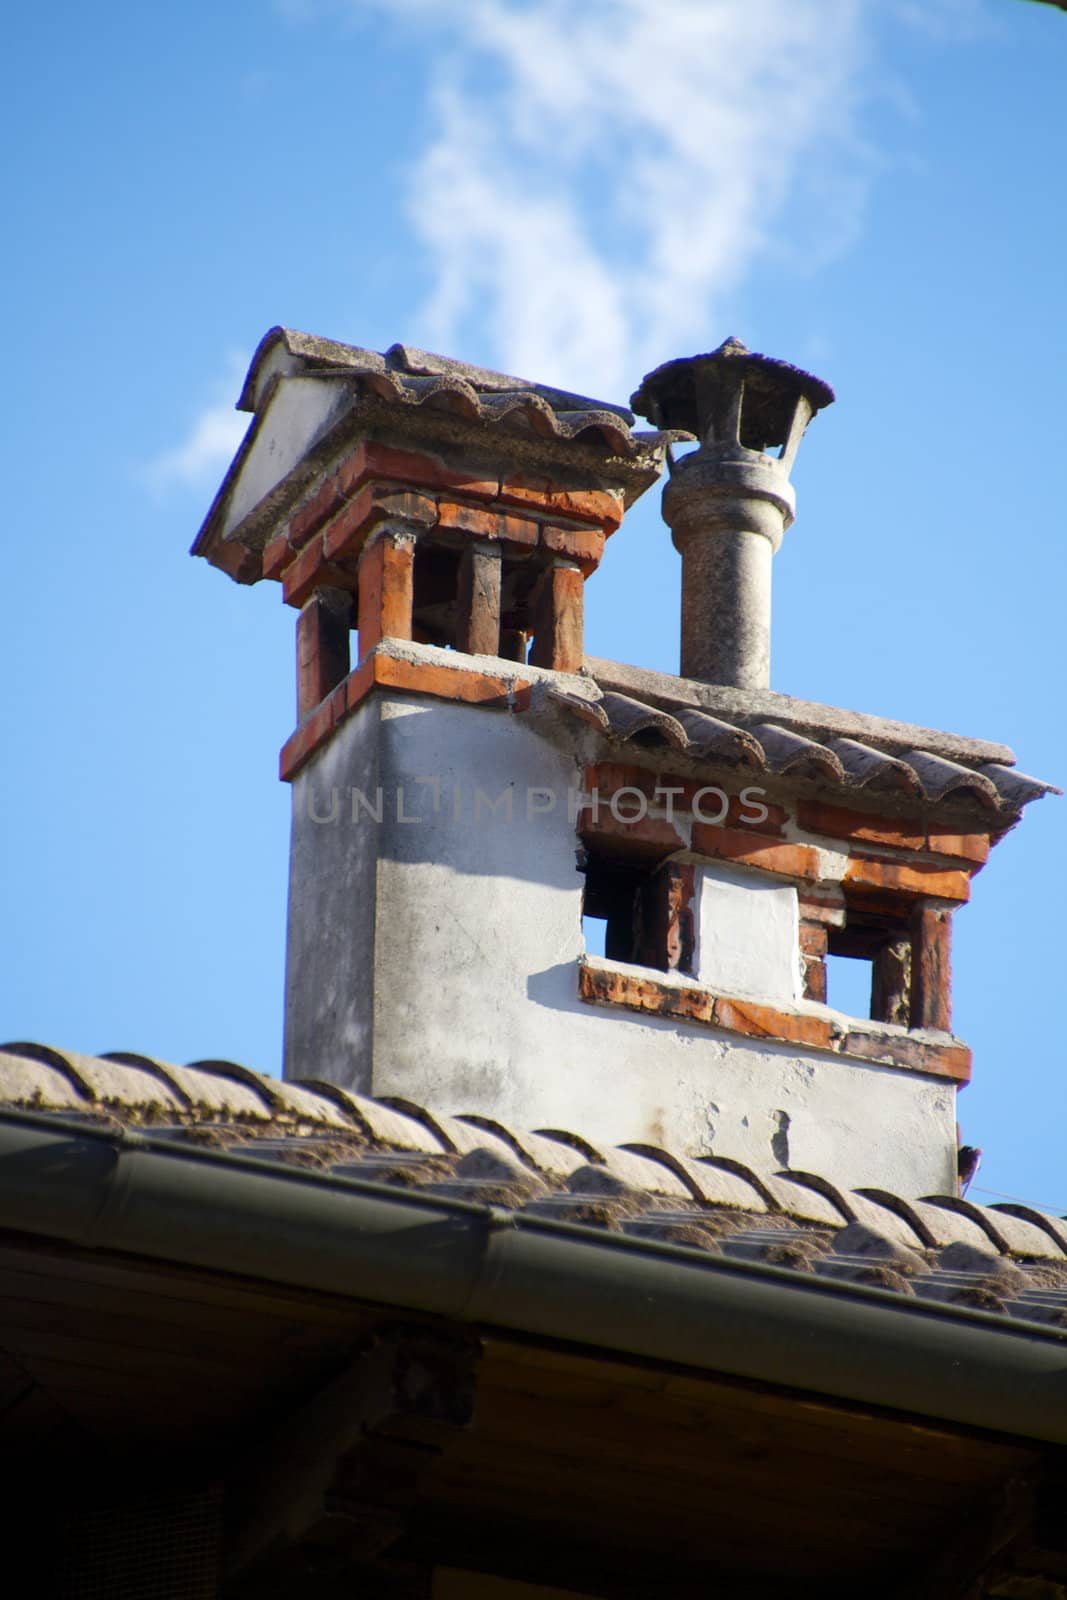 Gray roof with chimneys of a small town